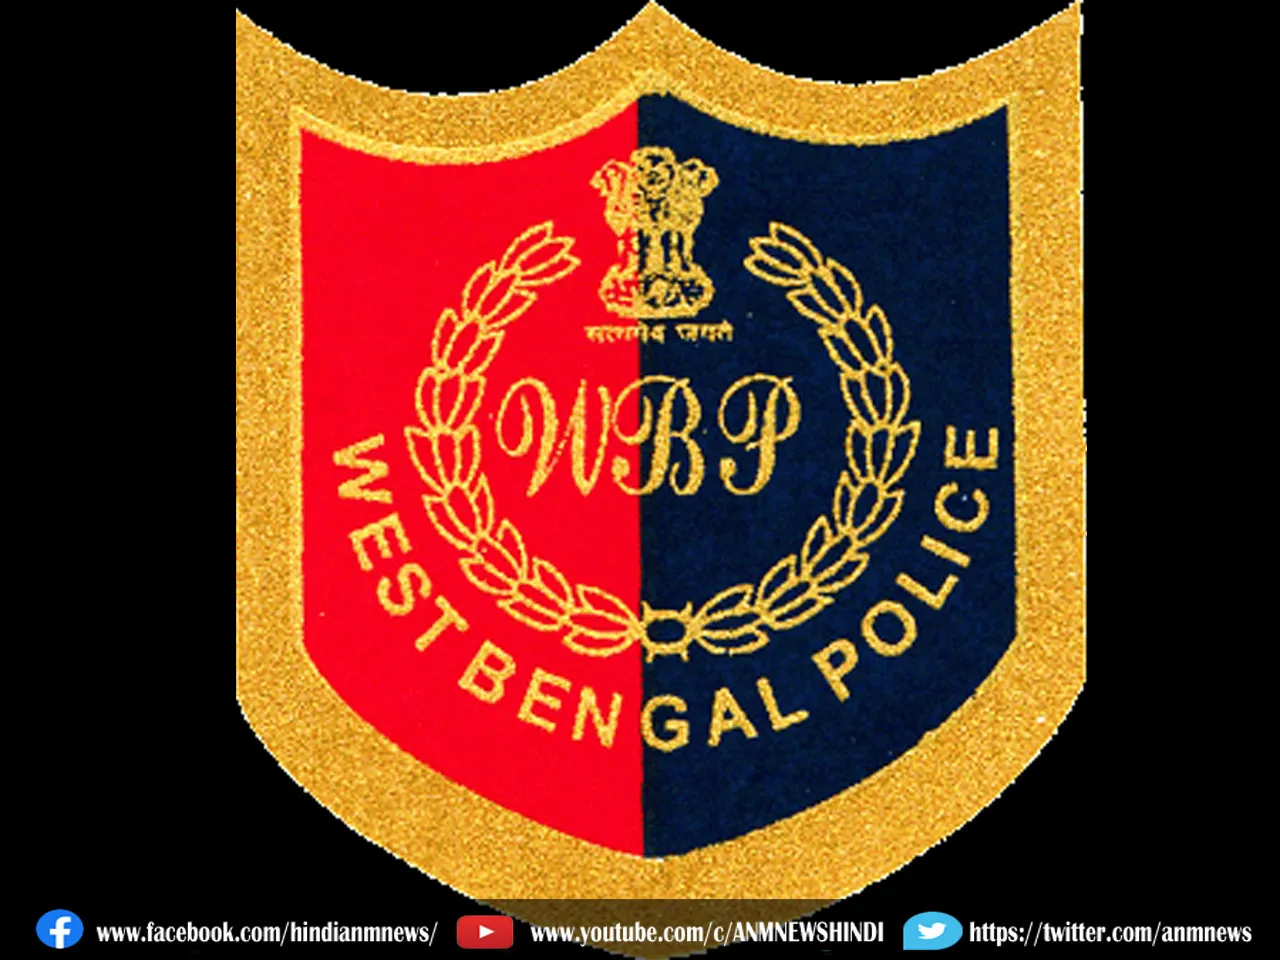 WEST BENGAL POLICE